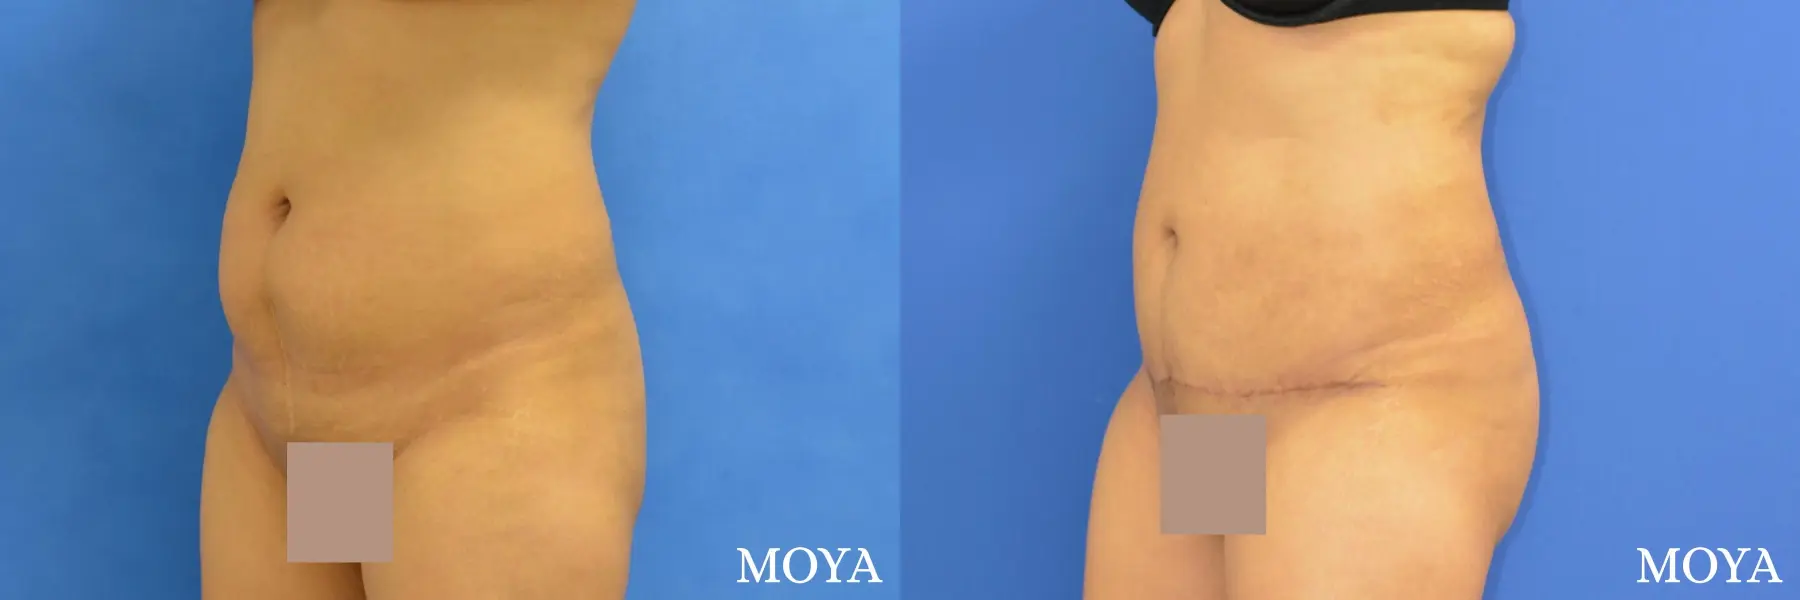 Tummy Tuck (mini):  Patient 1 - Before and After  